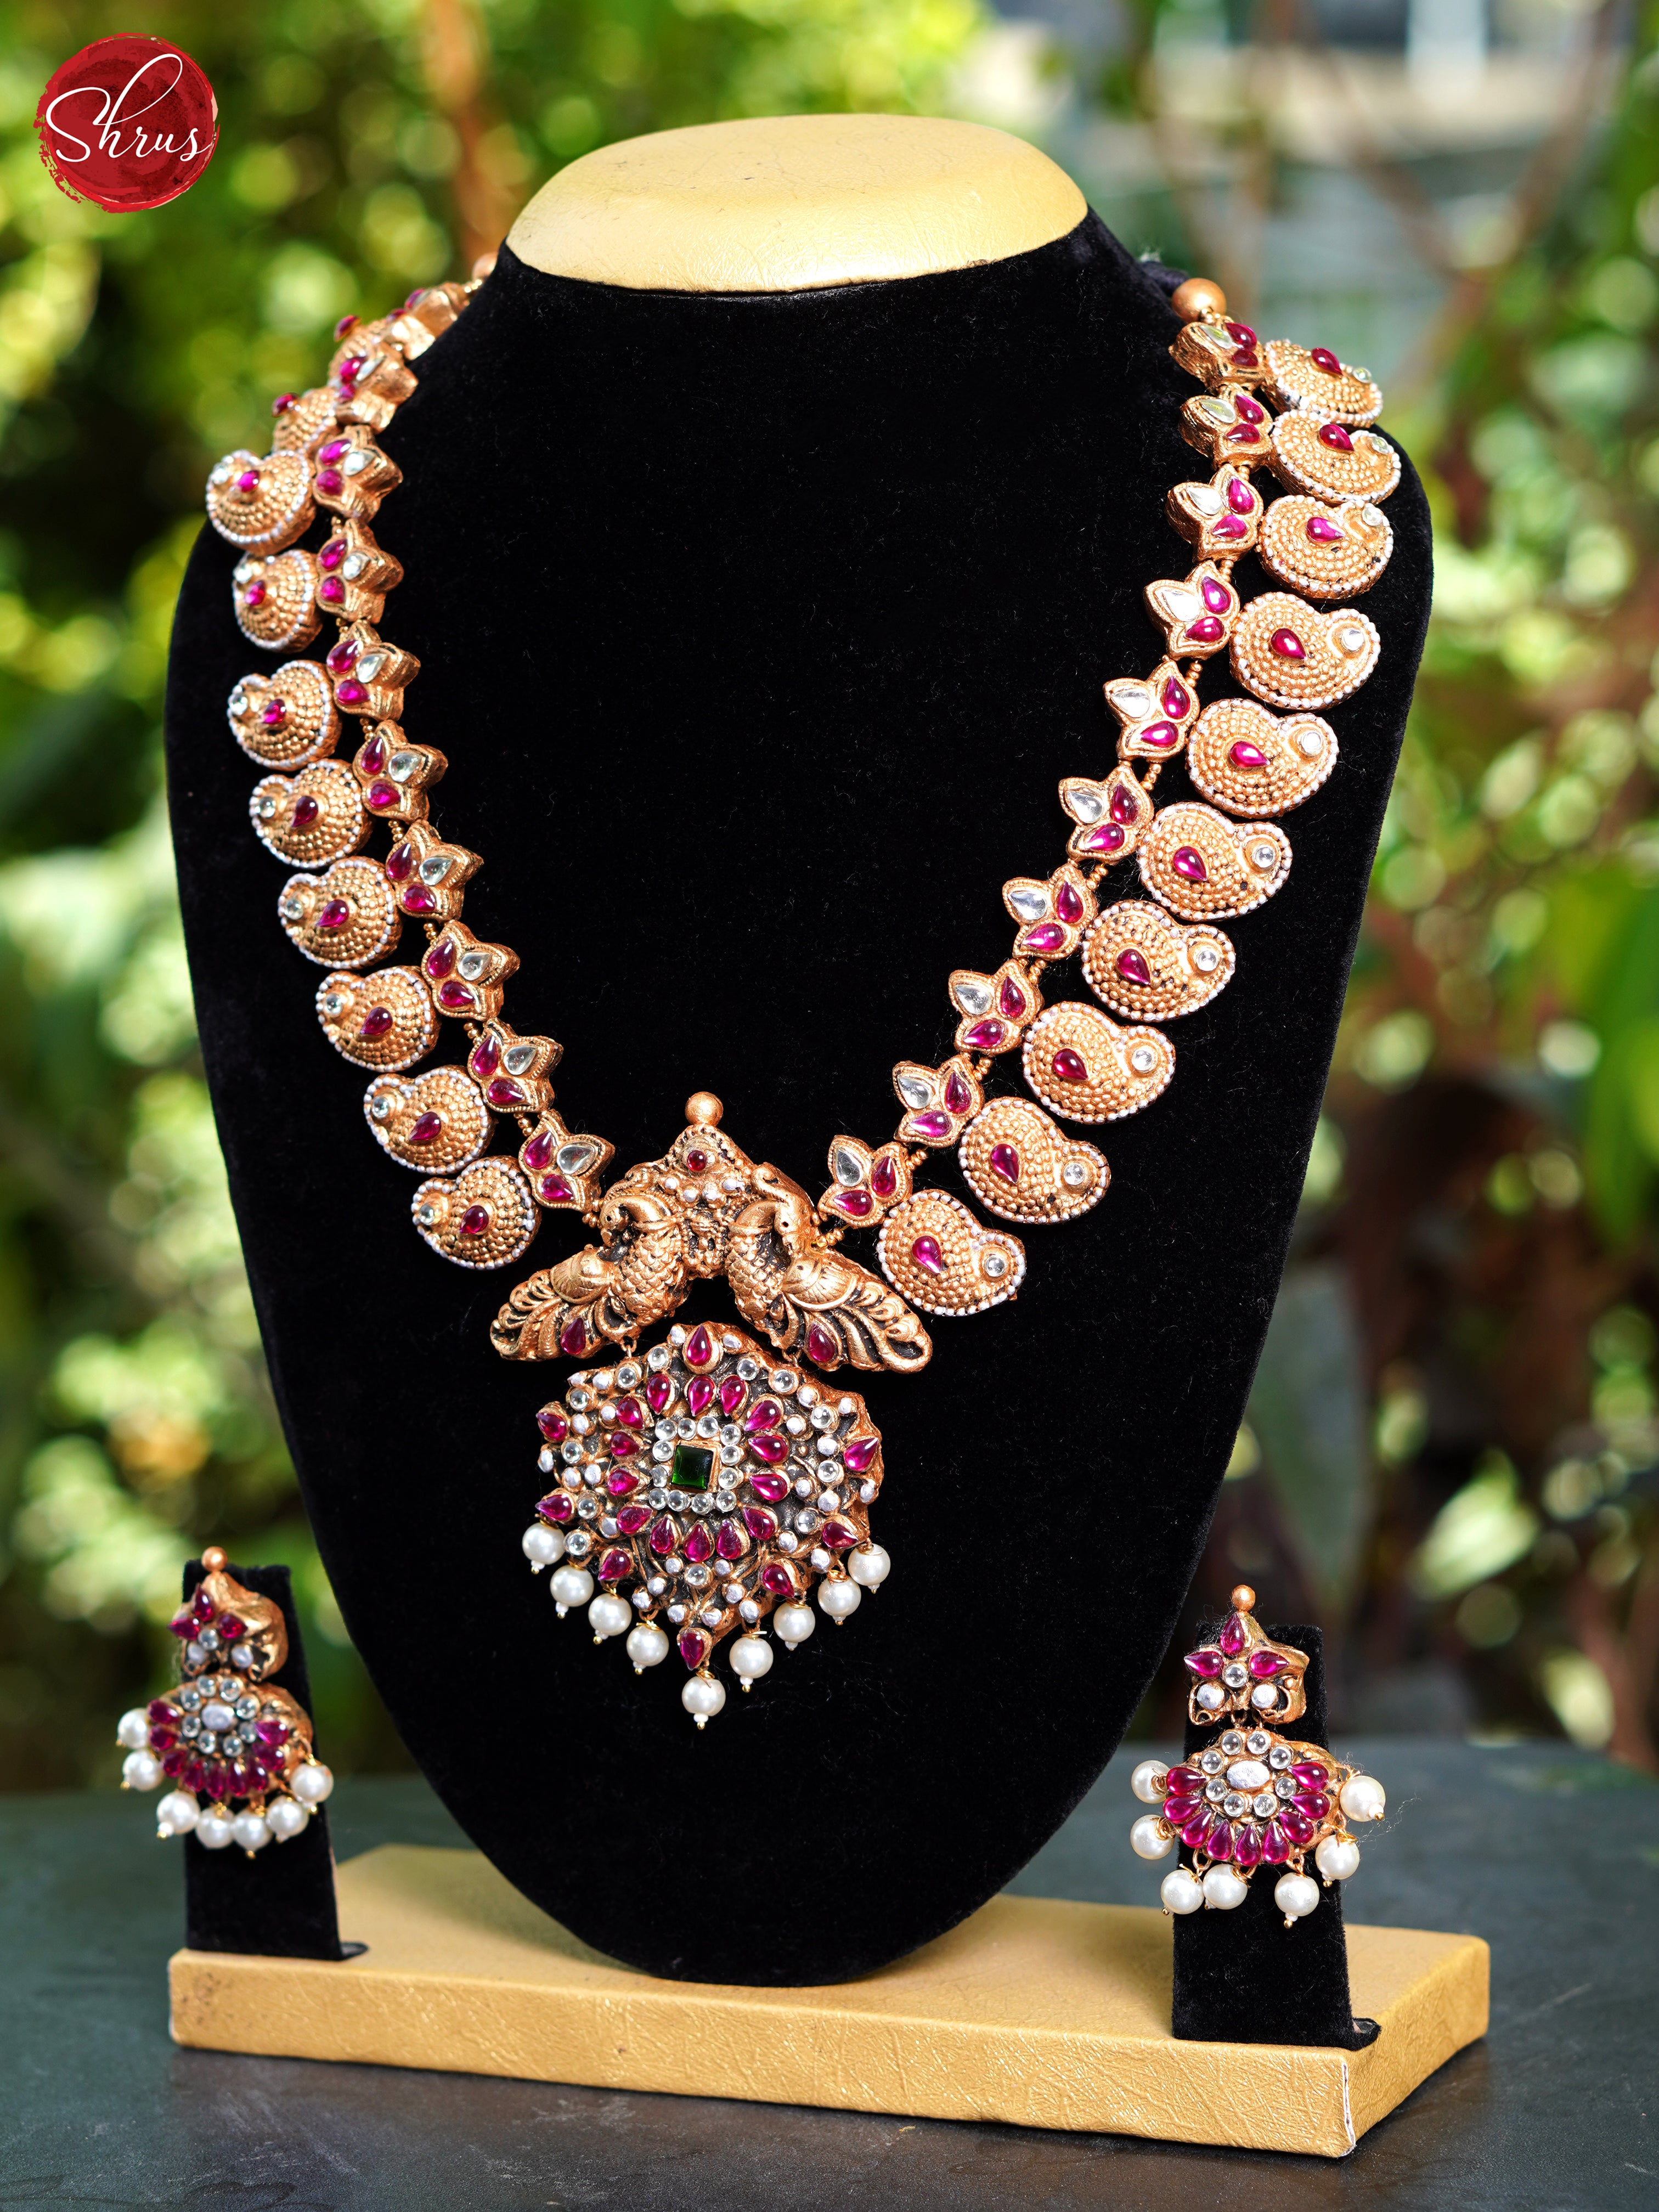 Floral pendant Manga Chain terracotta necklace with Earring  - Neck Piece & Earrings - Shop on ShrusEternity.com